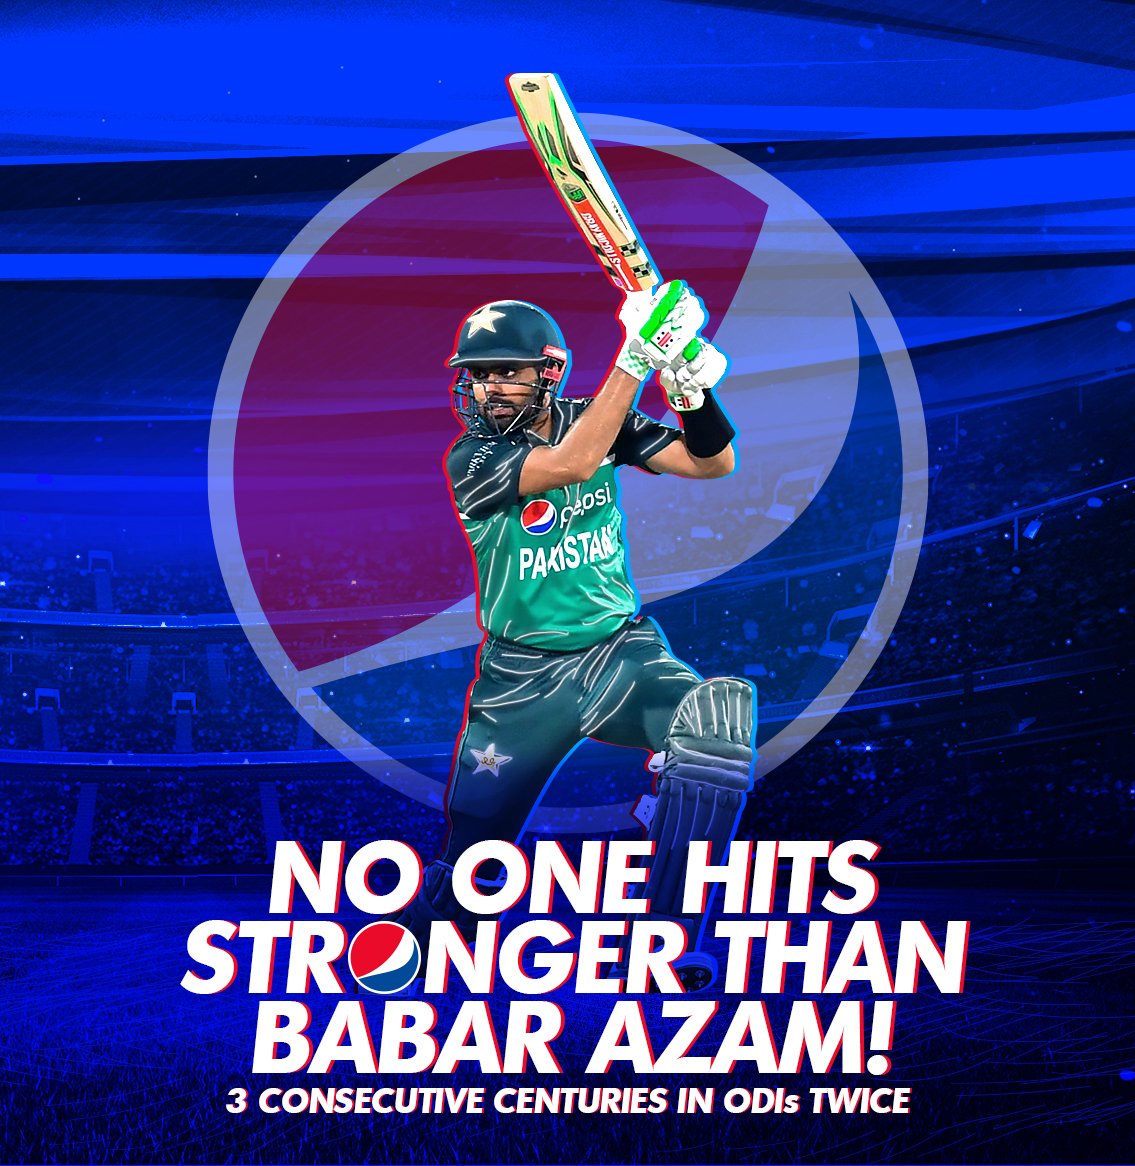 In celebration of our strong captain who gave hit after hit! King Babar becomes the only batsman in the world to score 3 consecutive centuries in ODIs TWICE! Hum ne #NoticeKiya! @babarazam258 #PepsiPakistan